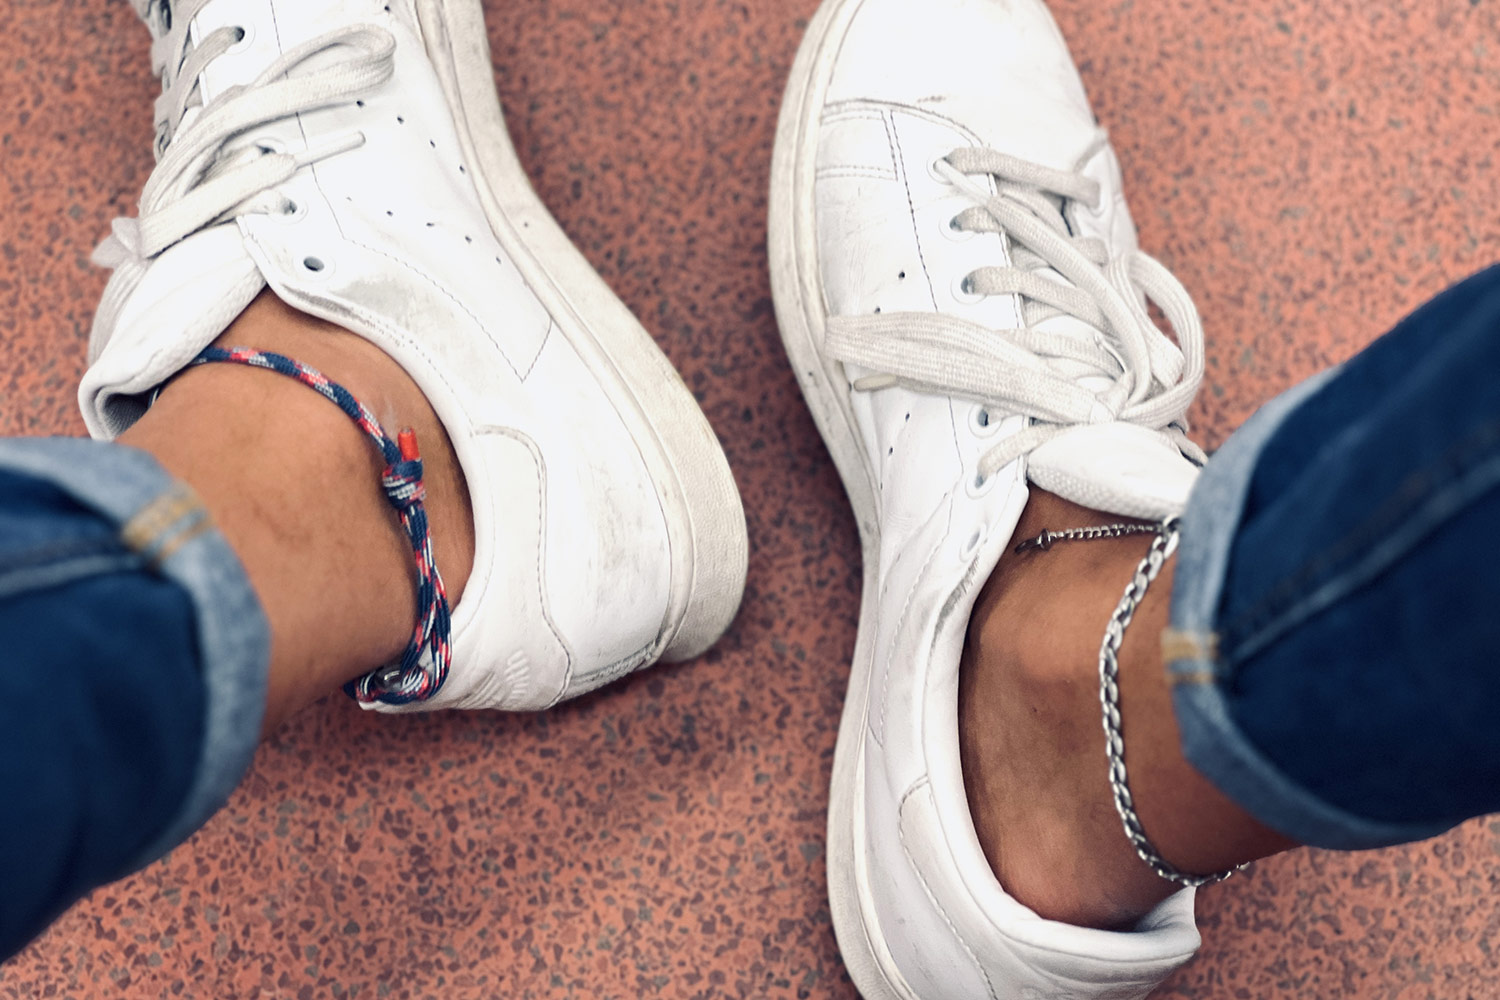 How to Wear an Anklet? - Alexis Jae Jewelry